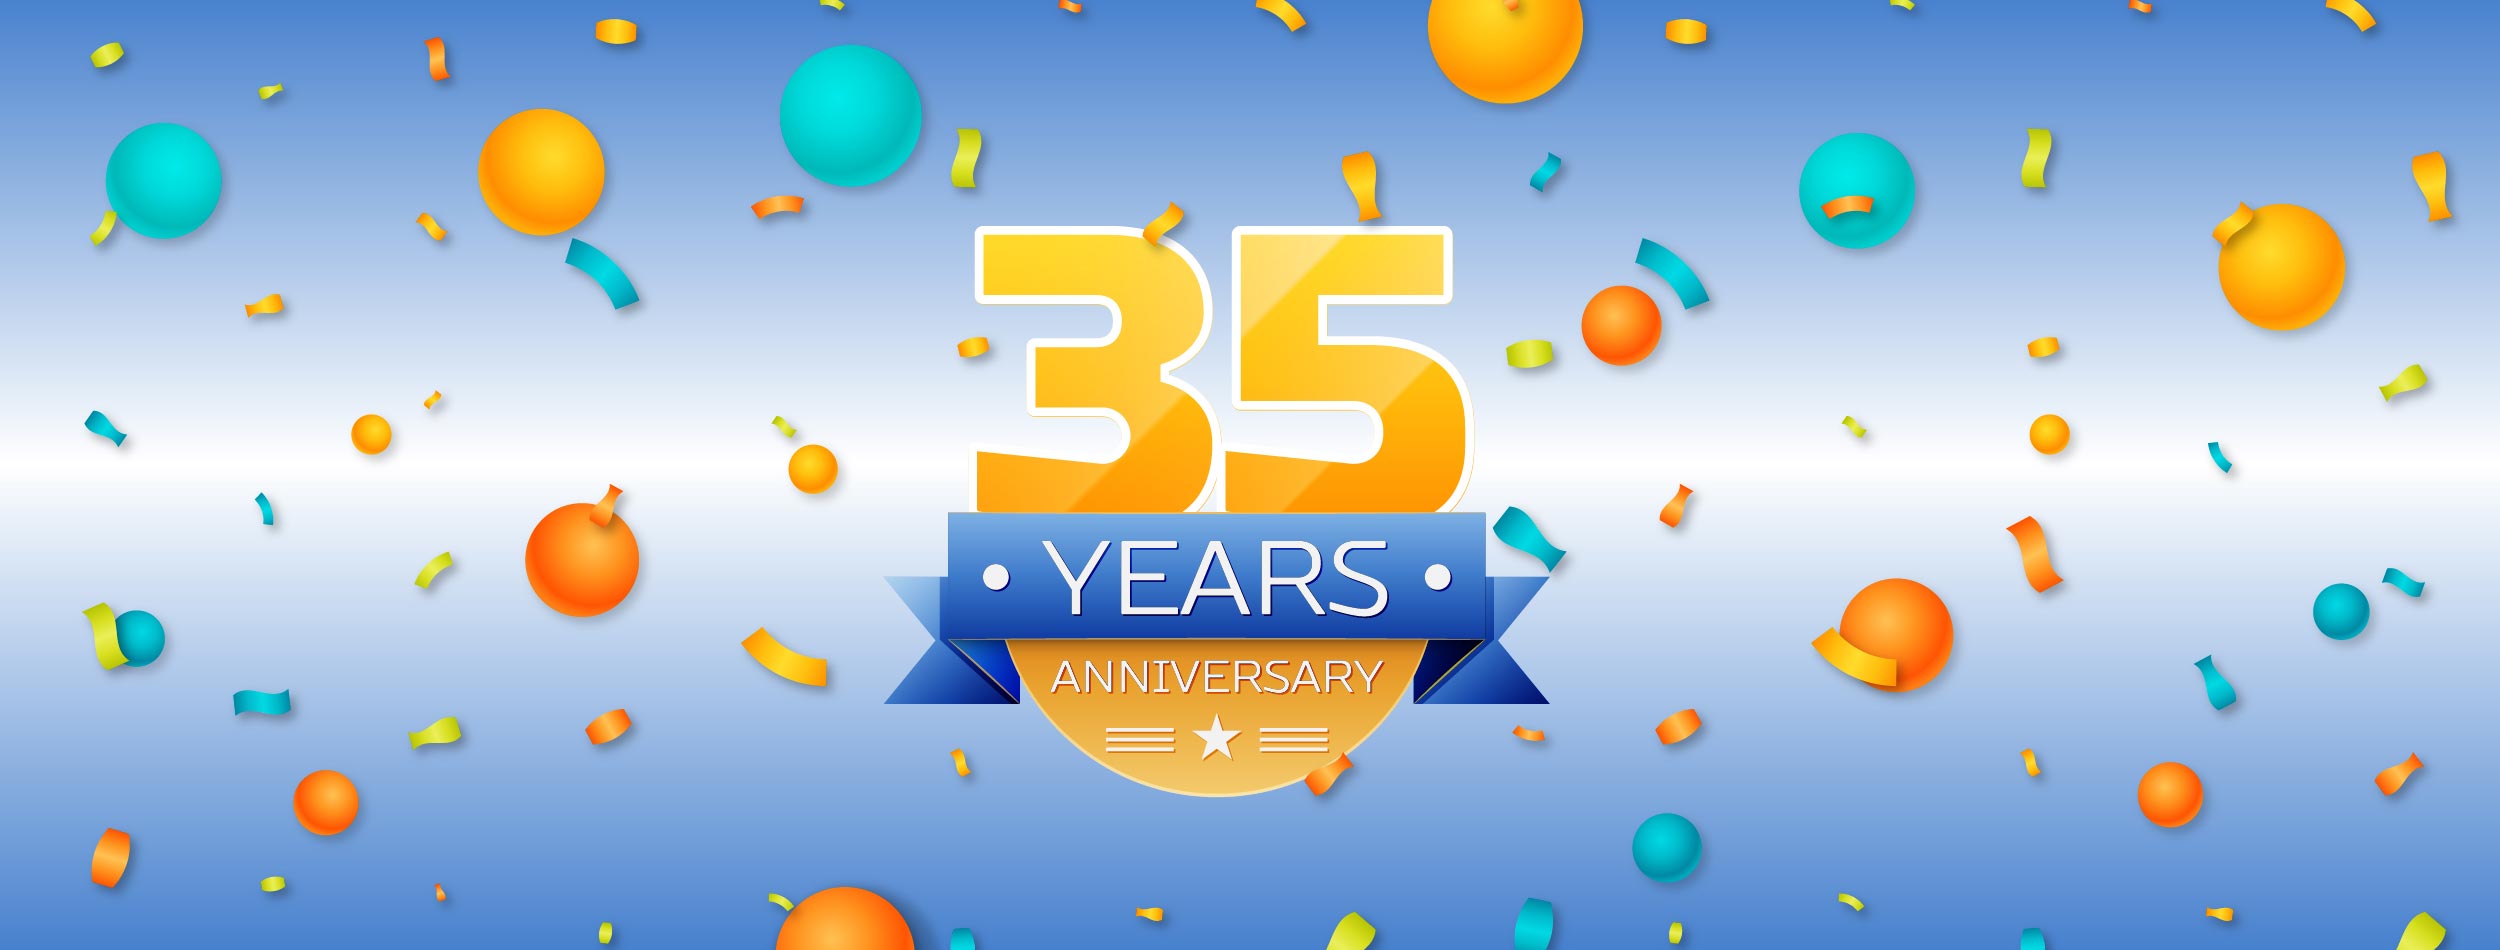 Celebrating 35 Years of Child Care! Innovation Education Partner and Texas Rising Star Certified